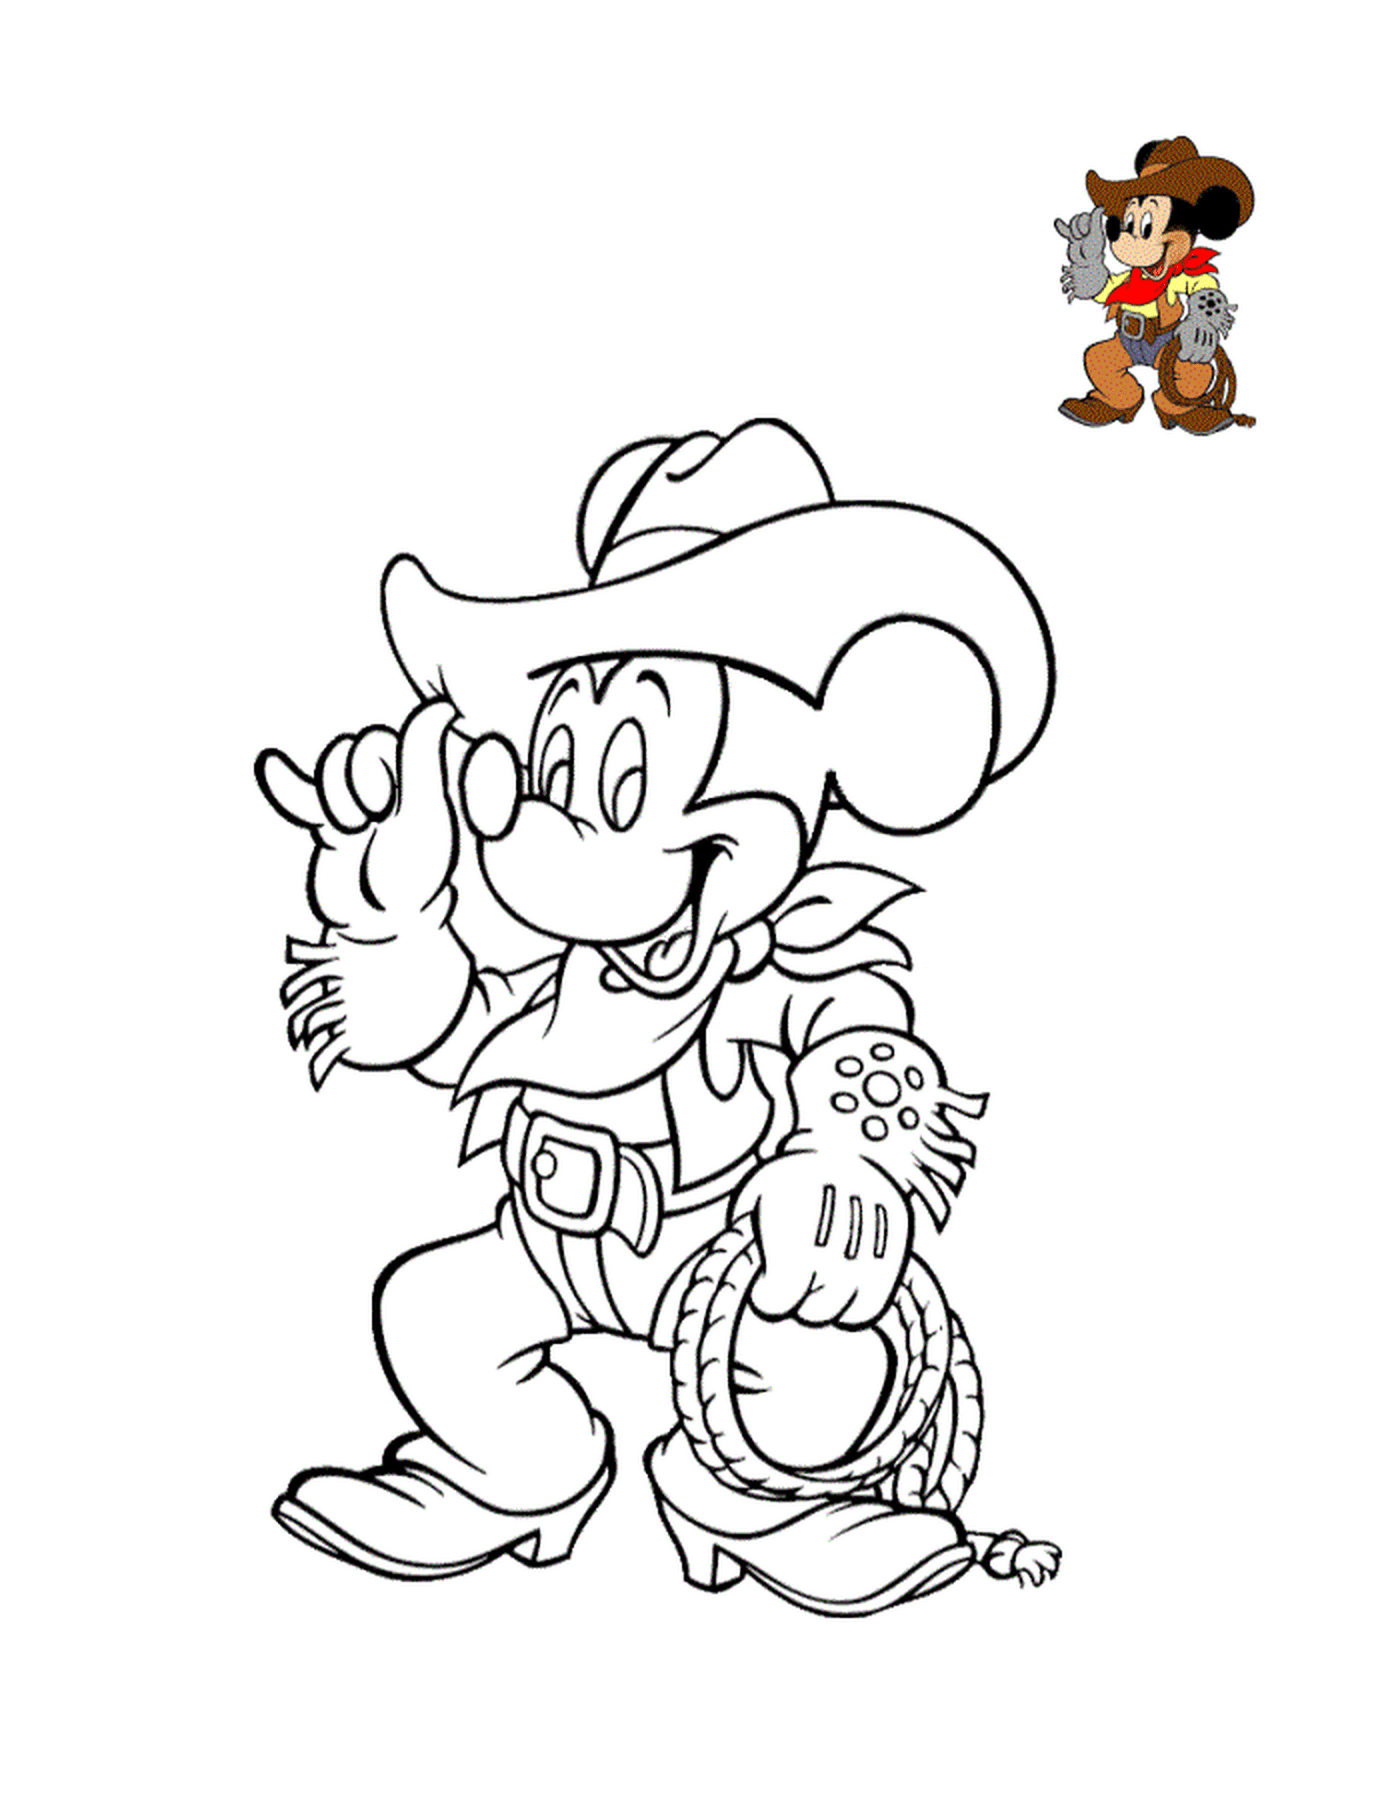  Mickey Mouse with boots and a cowboy hat 